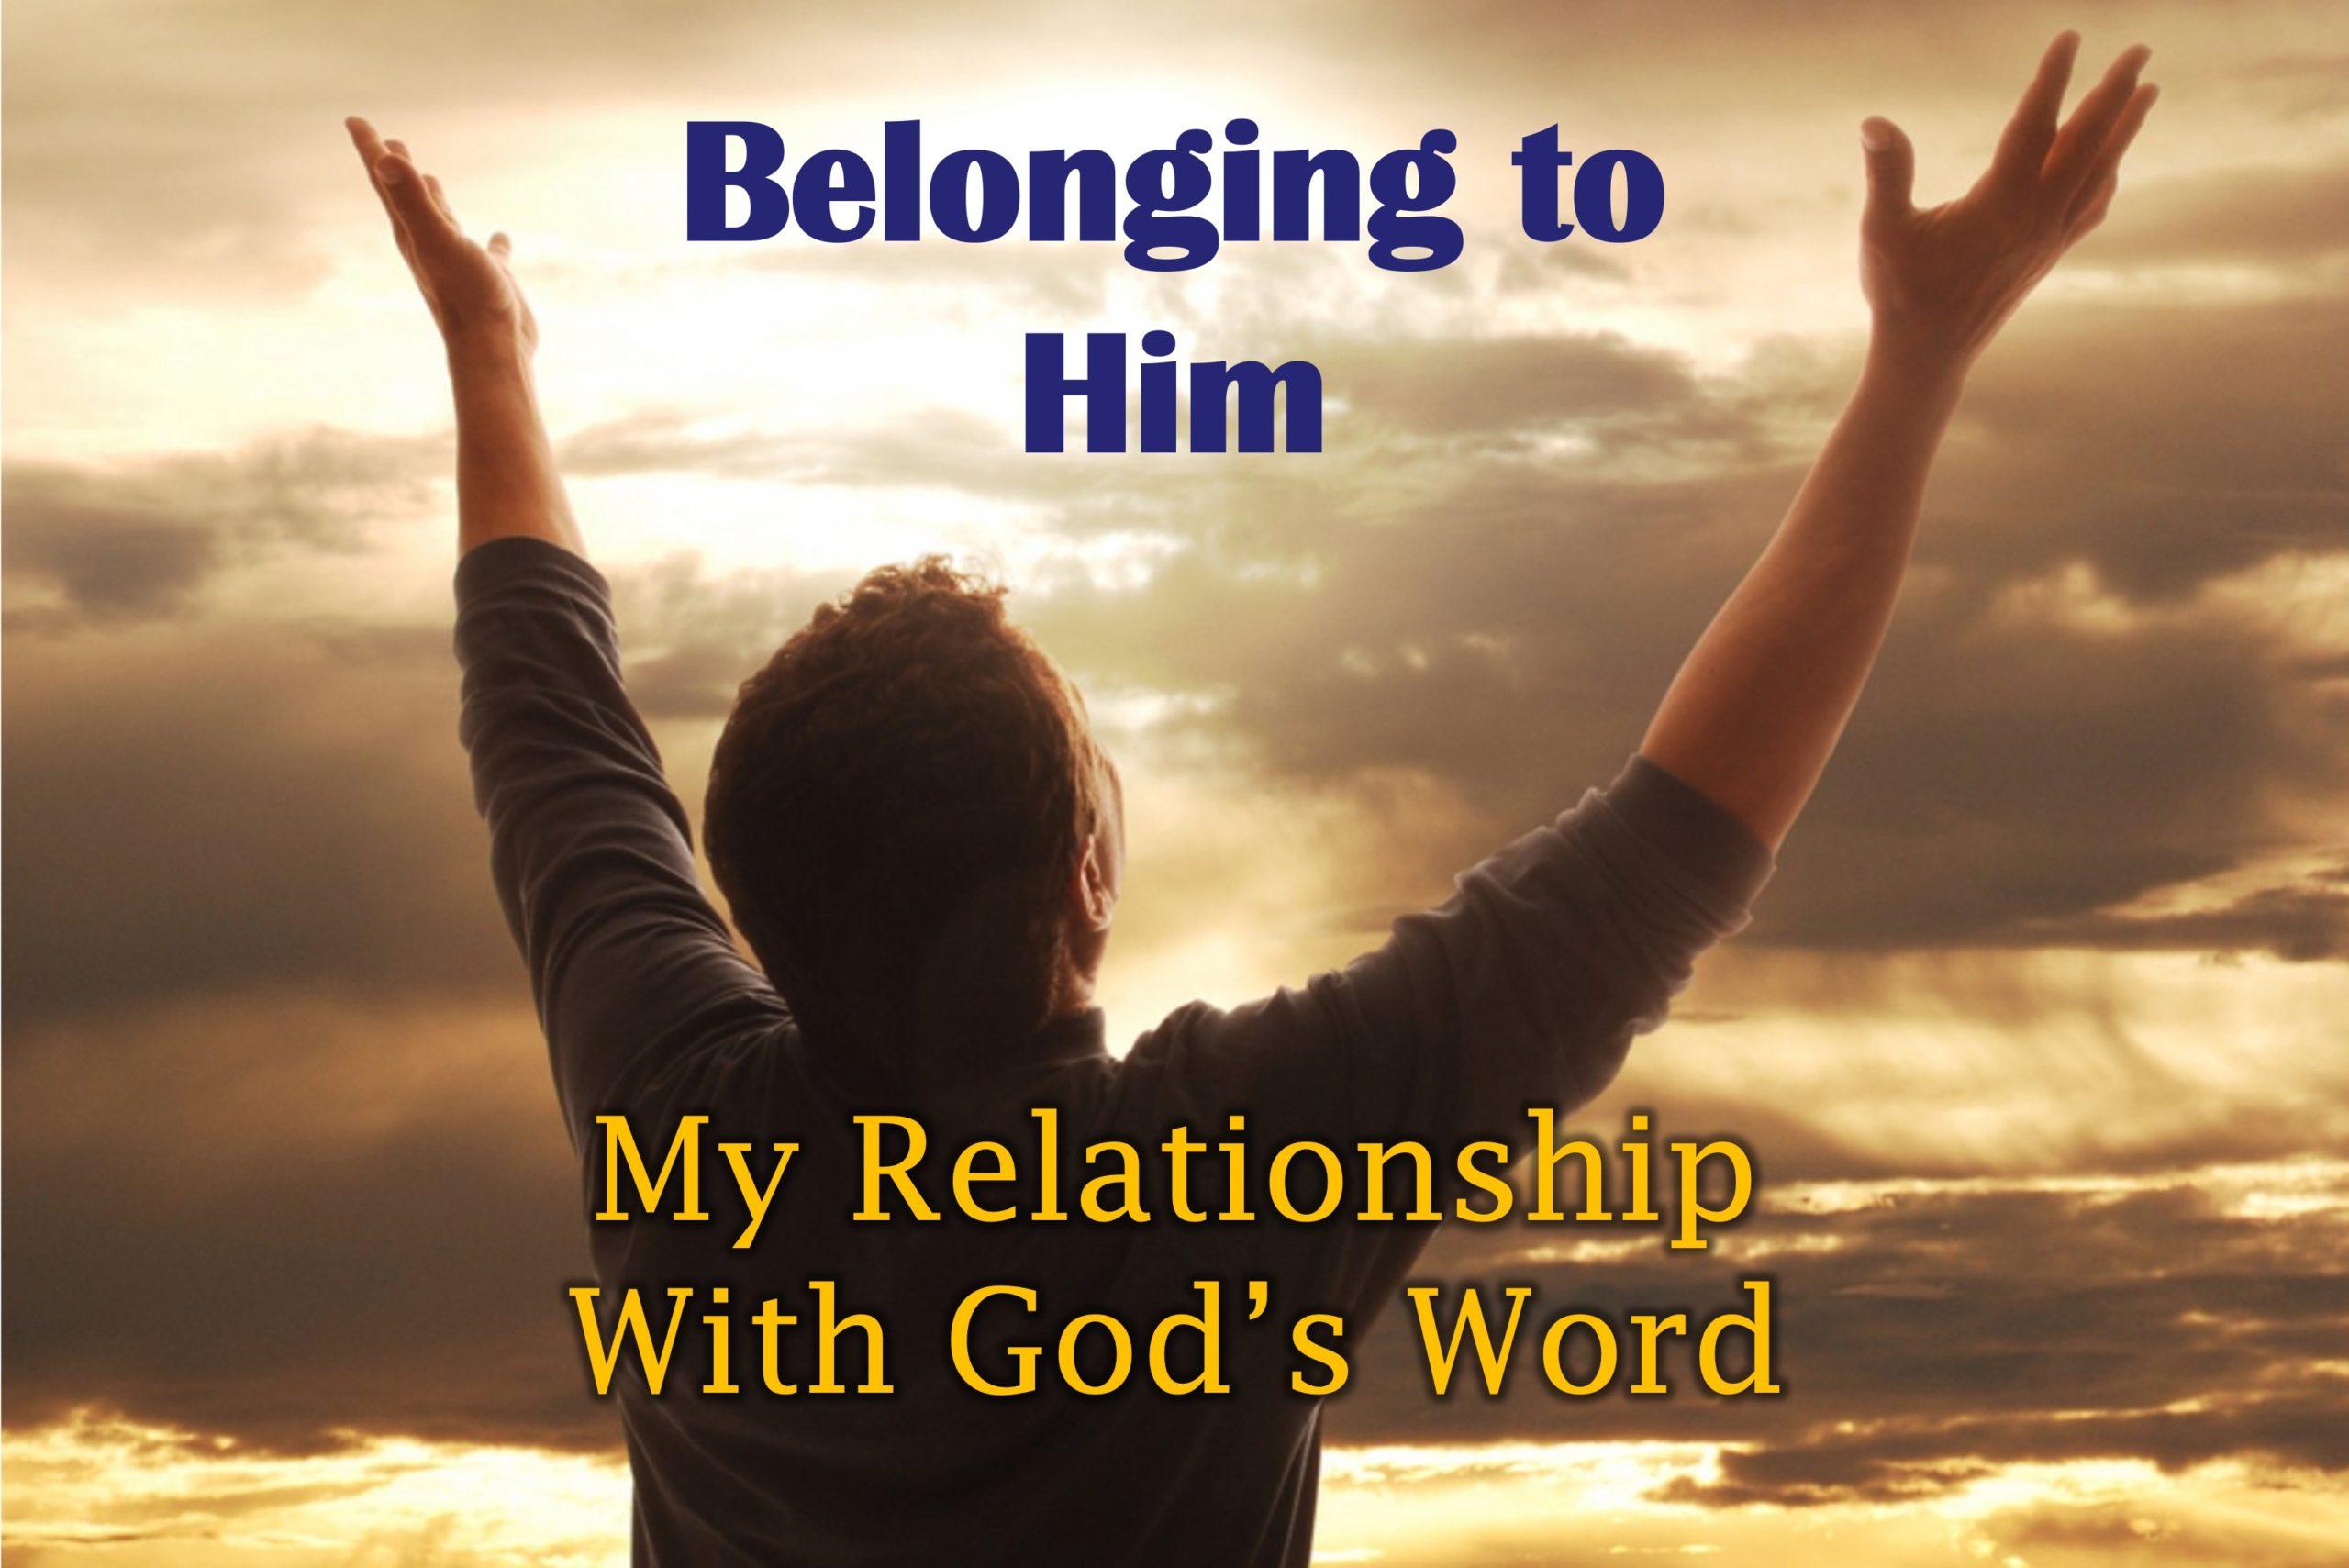 My Relationship with God’s Word